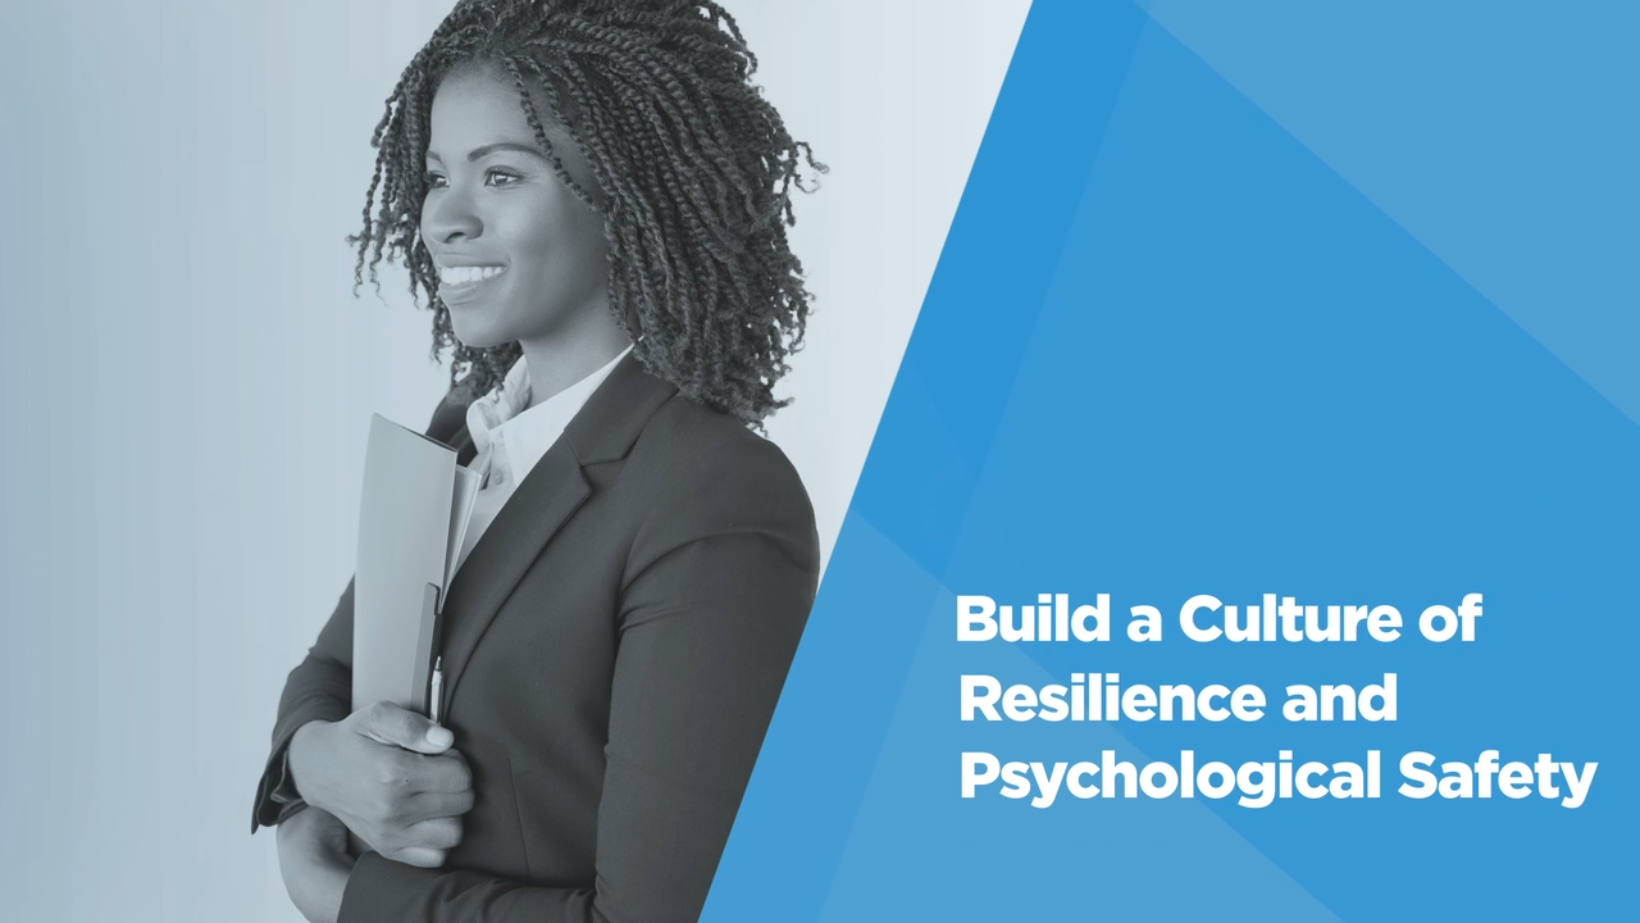 Video: Be a Better Leader: Build a Culture of Resilience and Psychological Safety